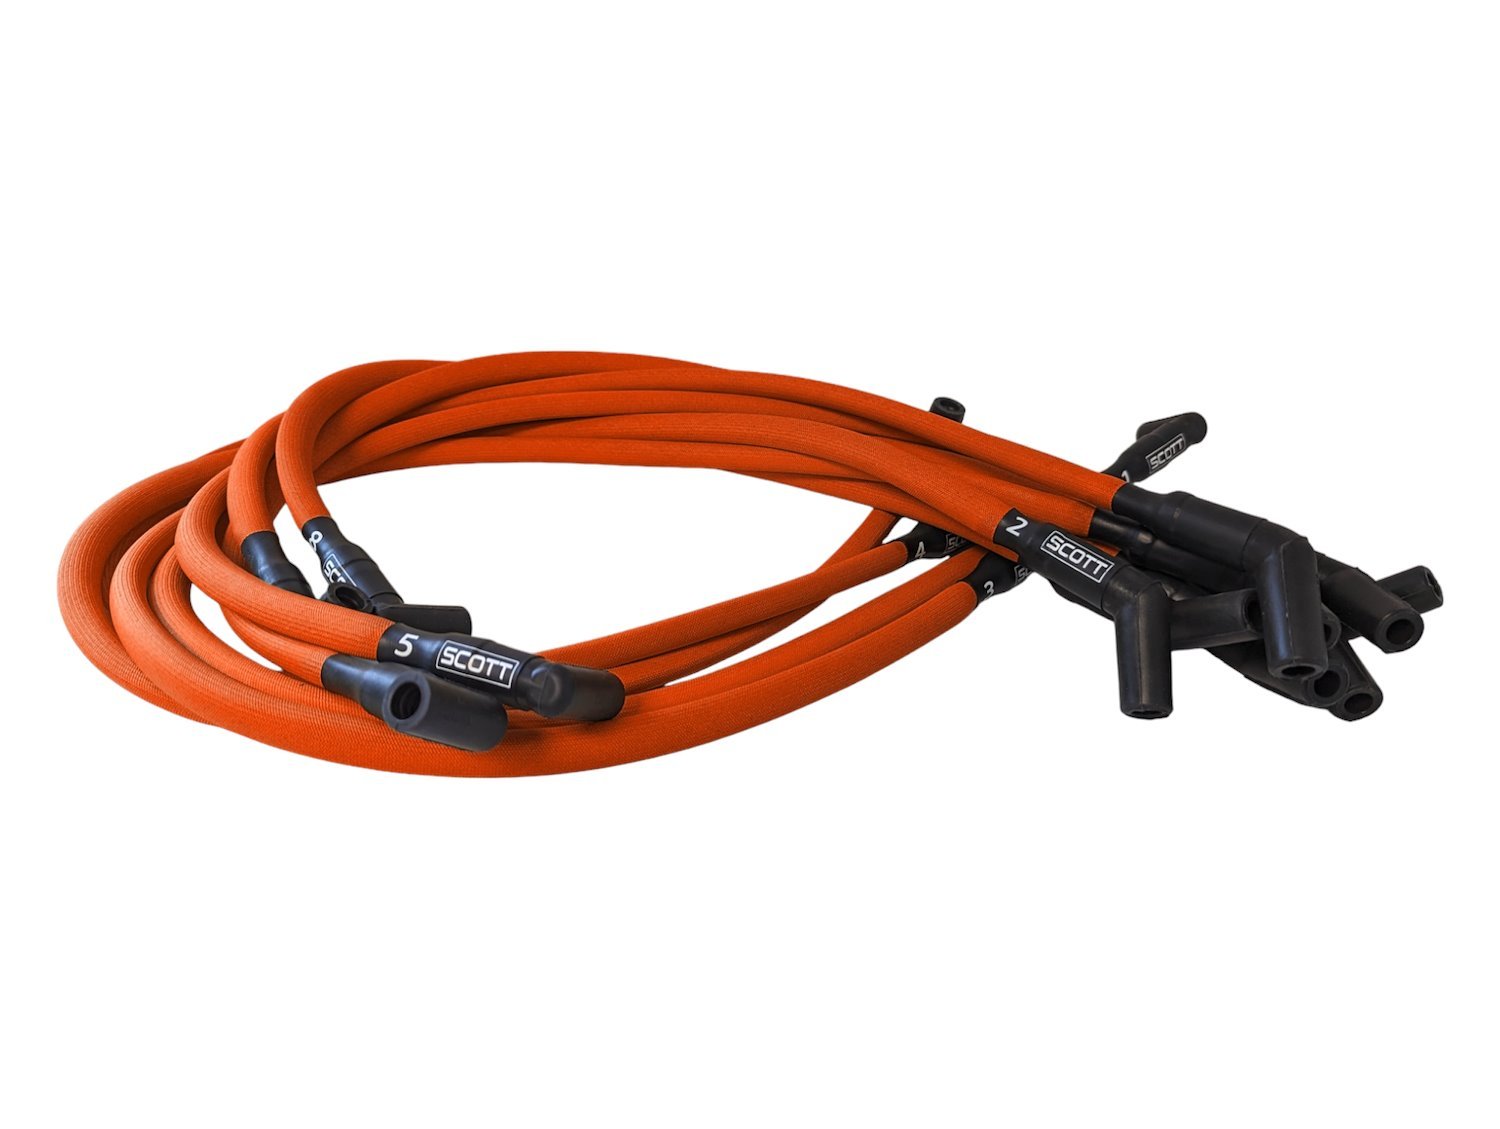 SPW300-PS-426-6 Super Mag Fiberglass-Oversleeved Spark Plug Wire Set for Small Block Ford, Over Valve Cover [Orange]